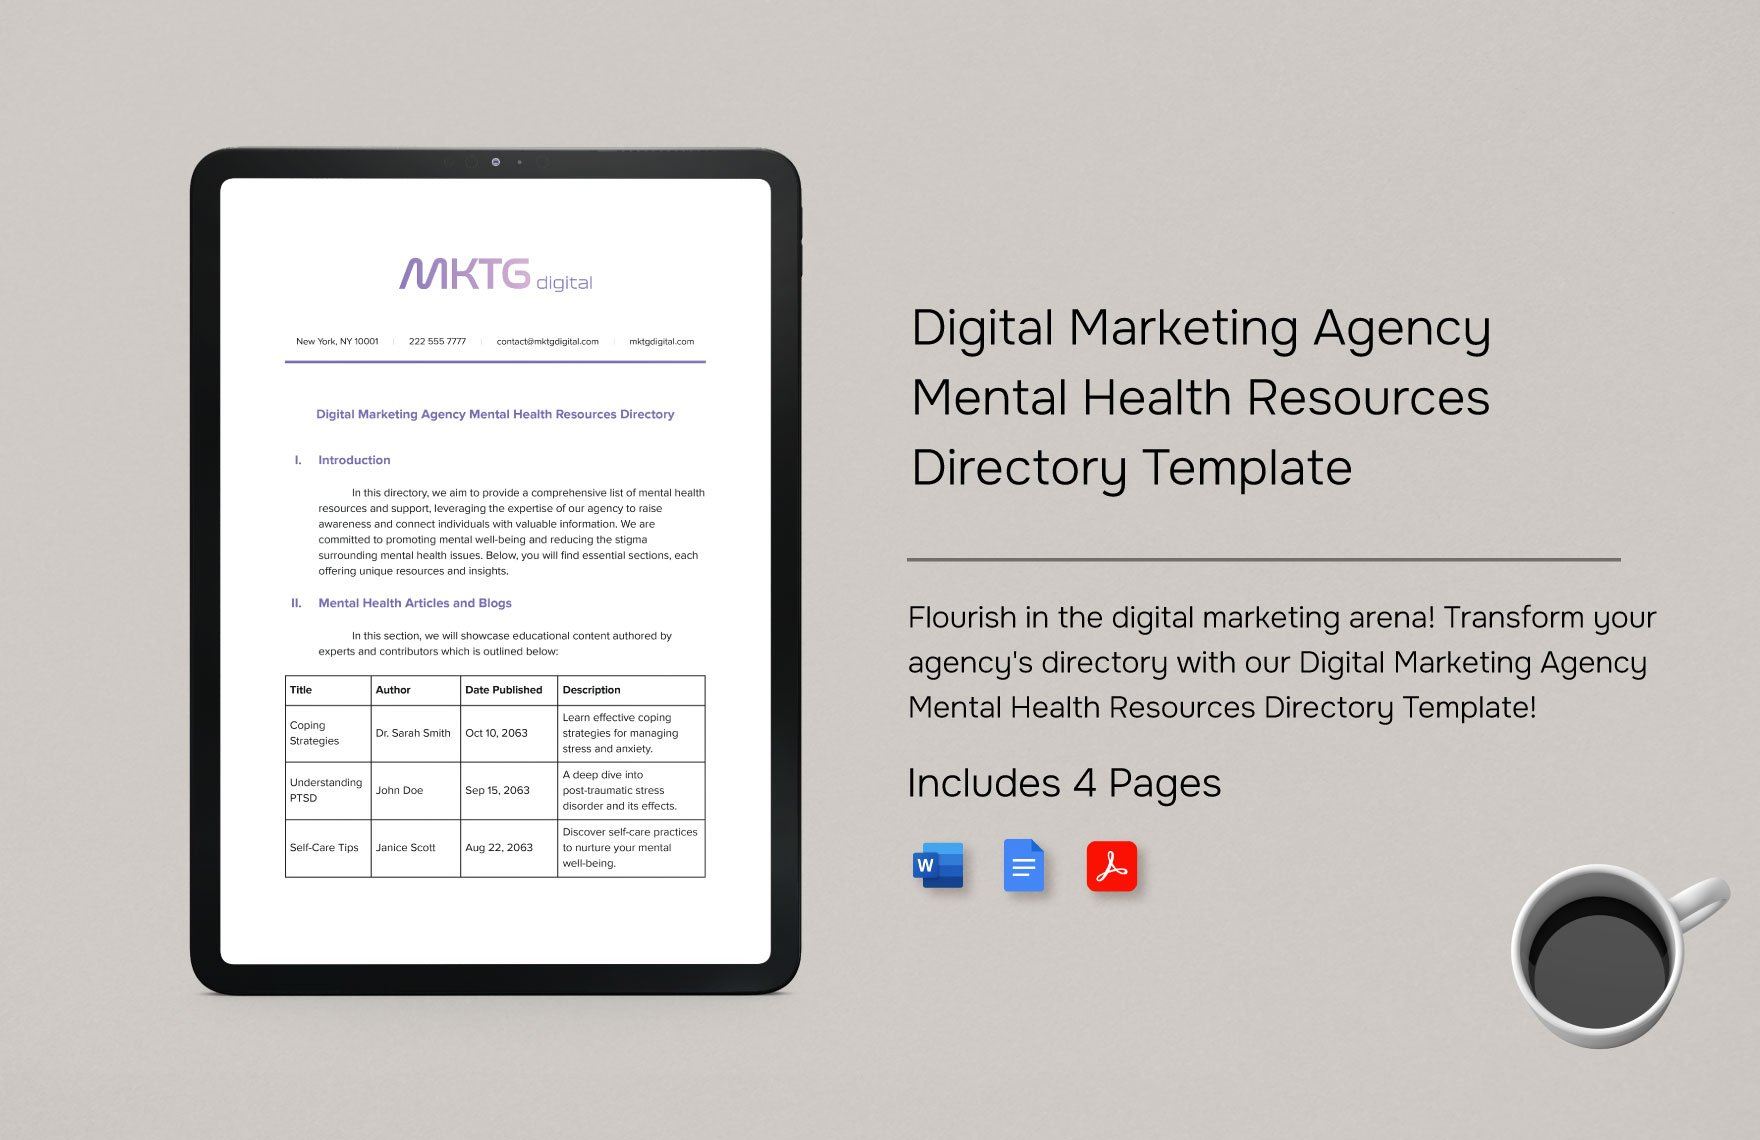 Digital Marketing Agency Mental Health Resources Directory Template